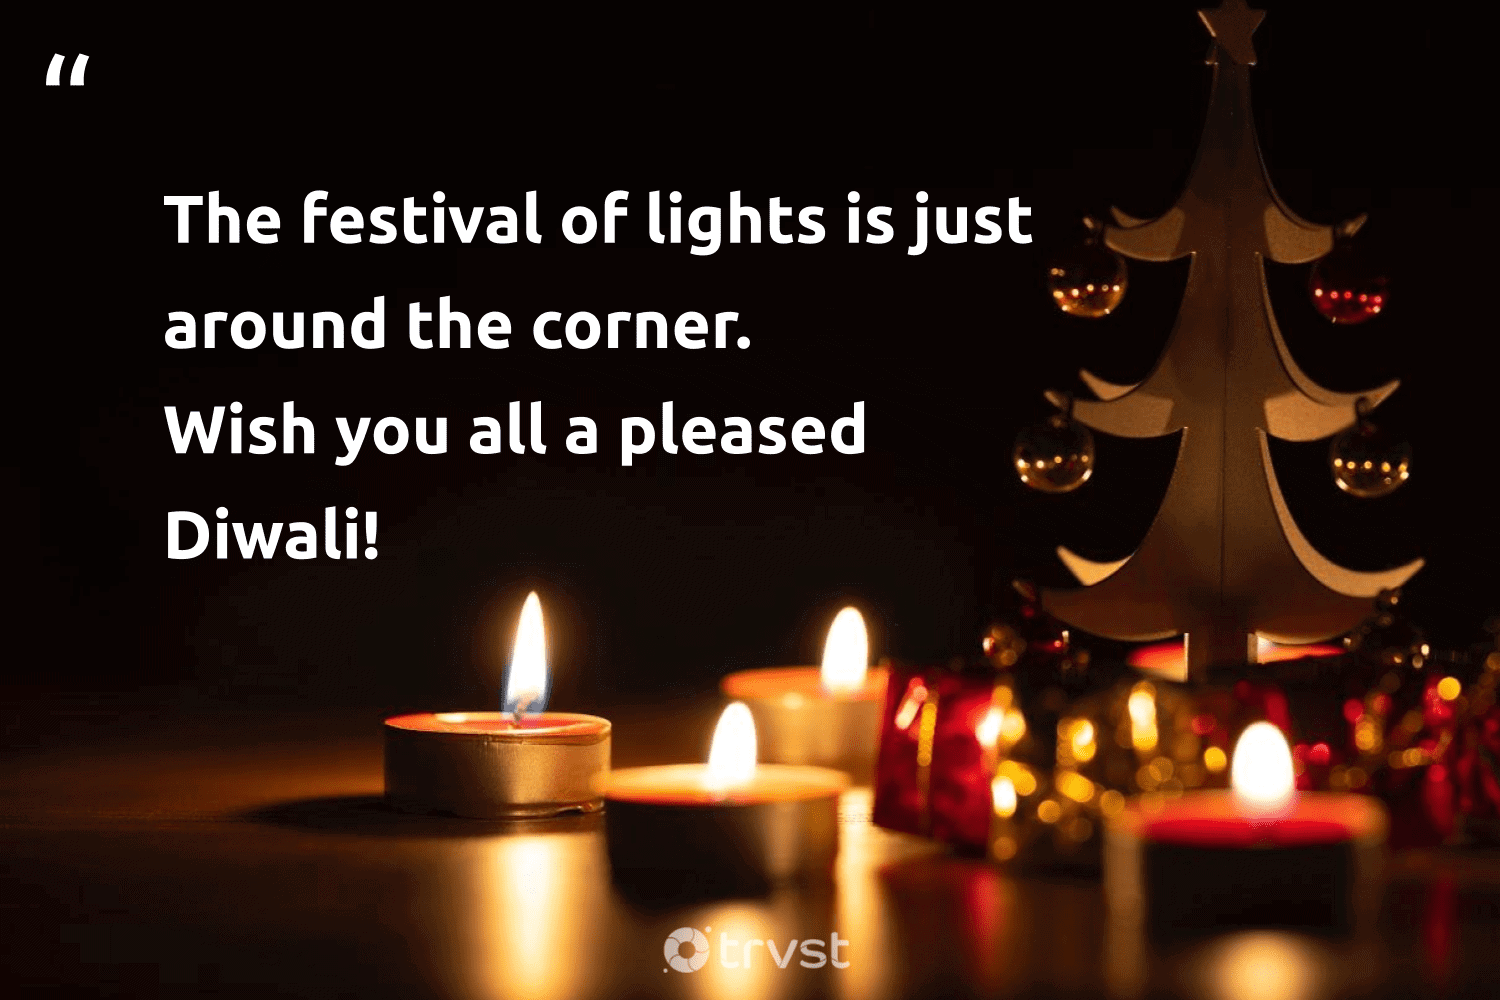 diwali quotes the festival of lights is 6857